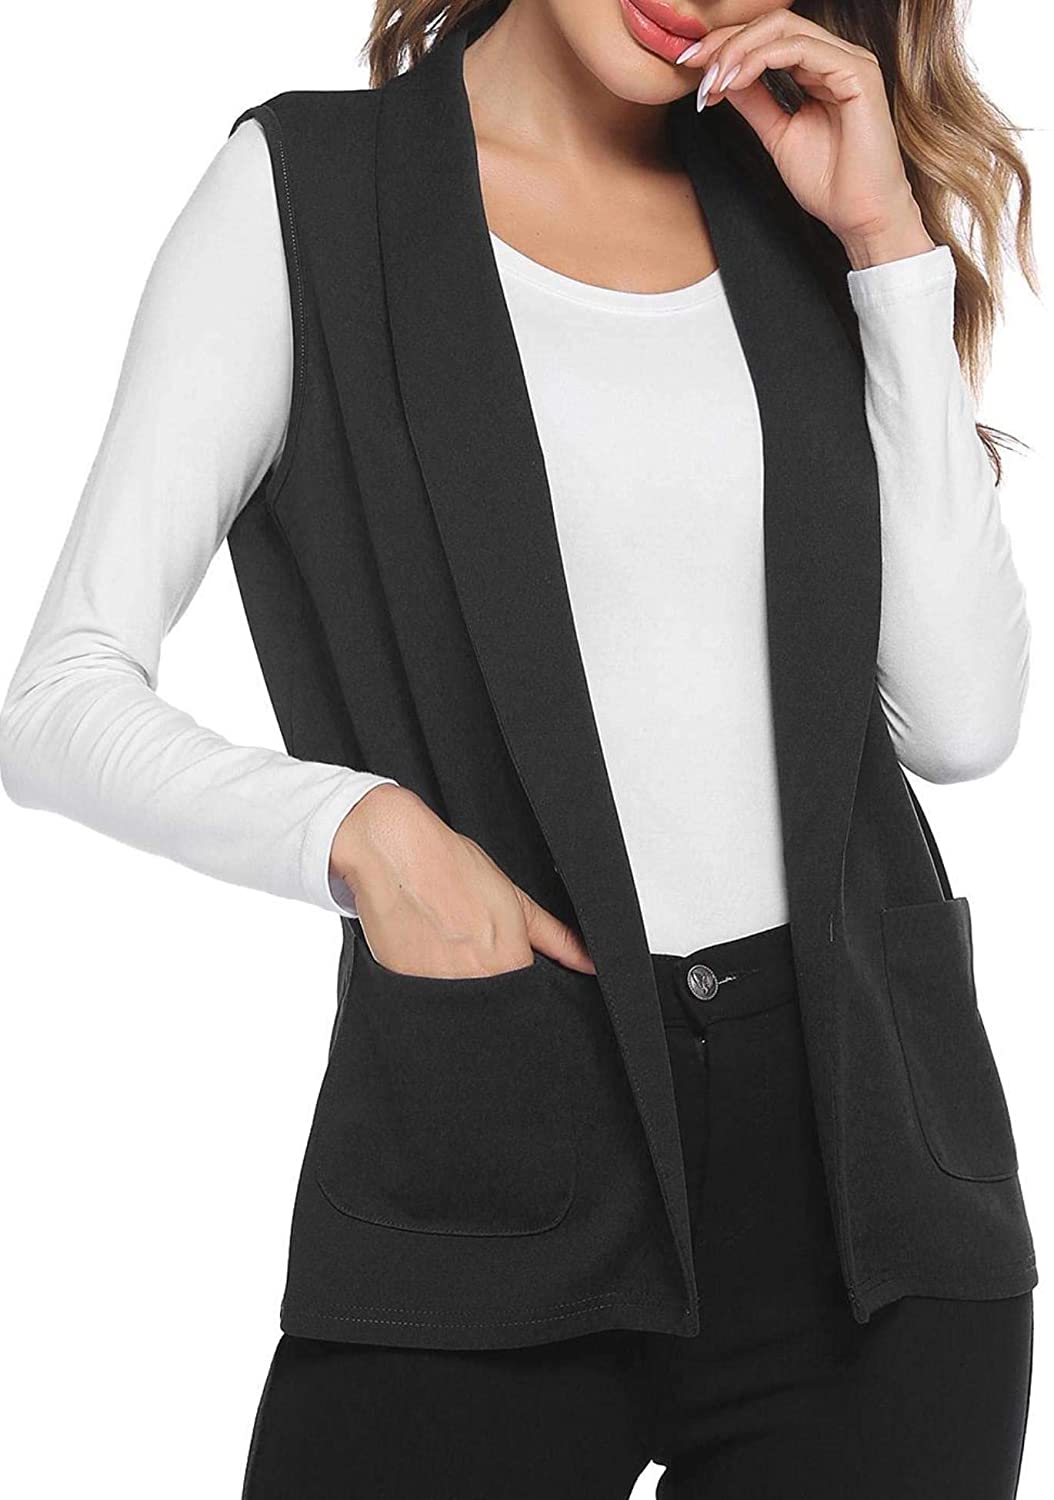 Dealwell Womens Sleeveless Vest Casual Open Front Cardigan Blazer with Pockets